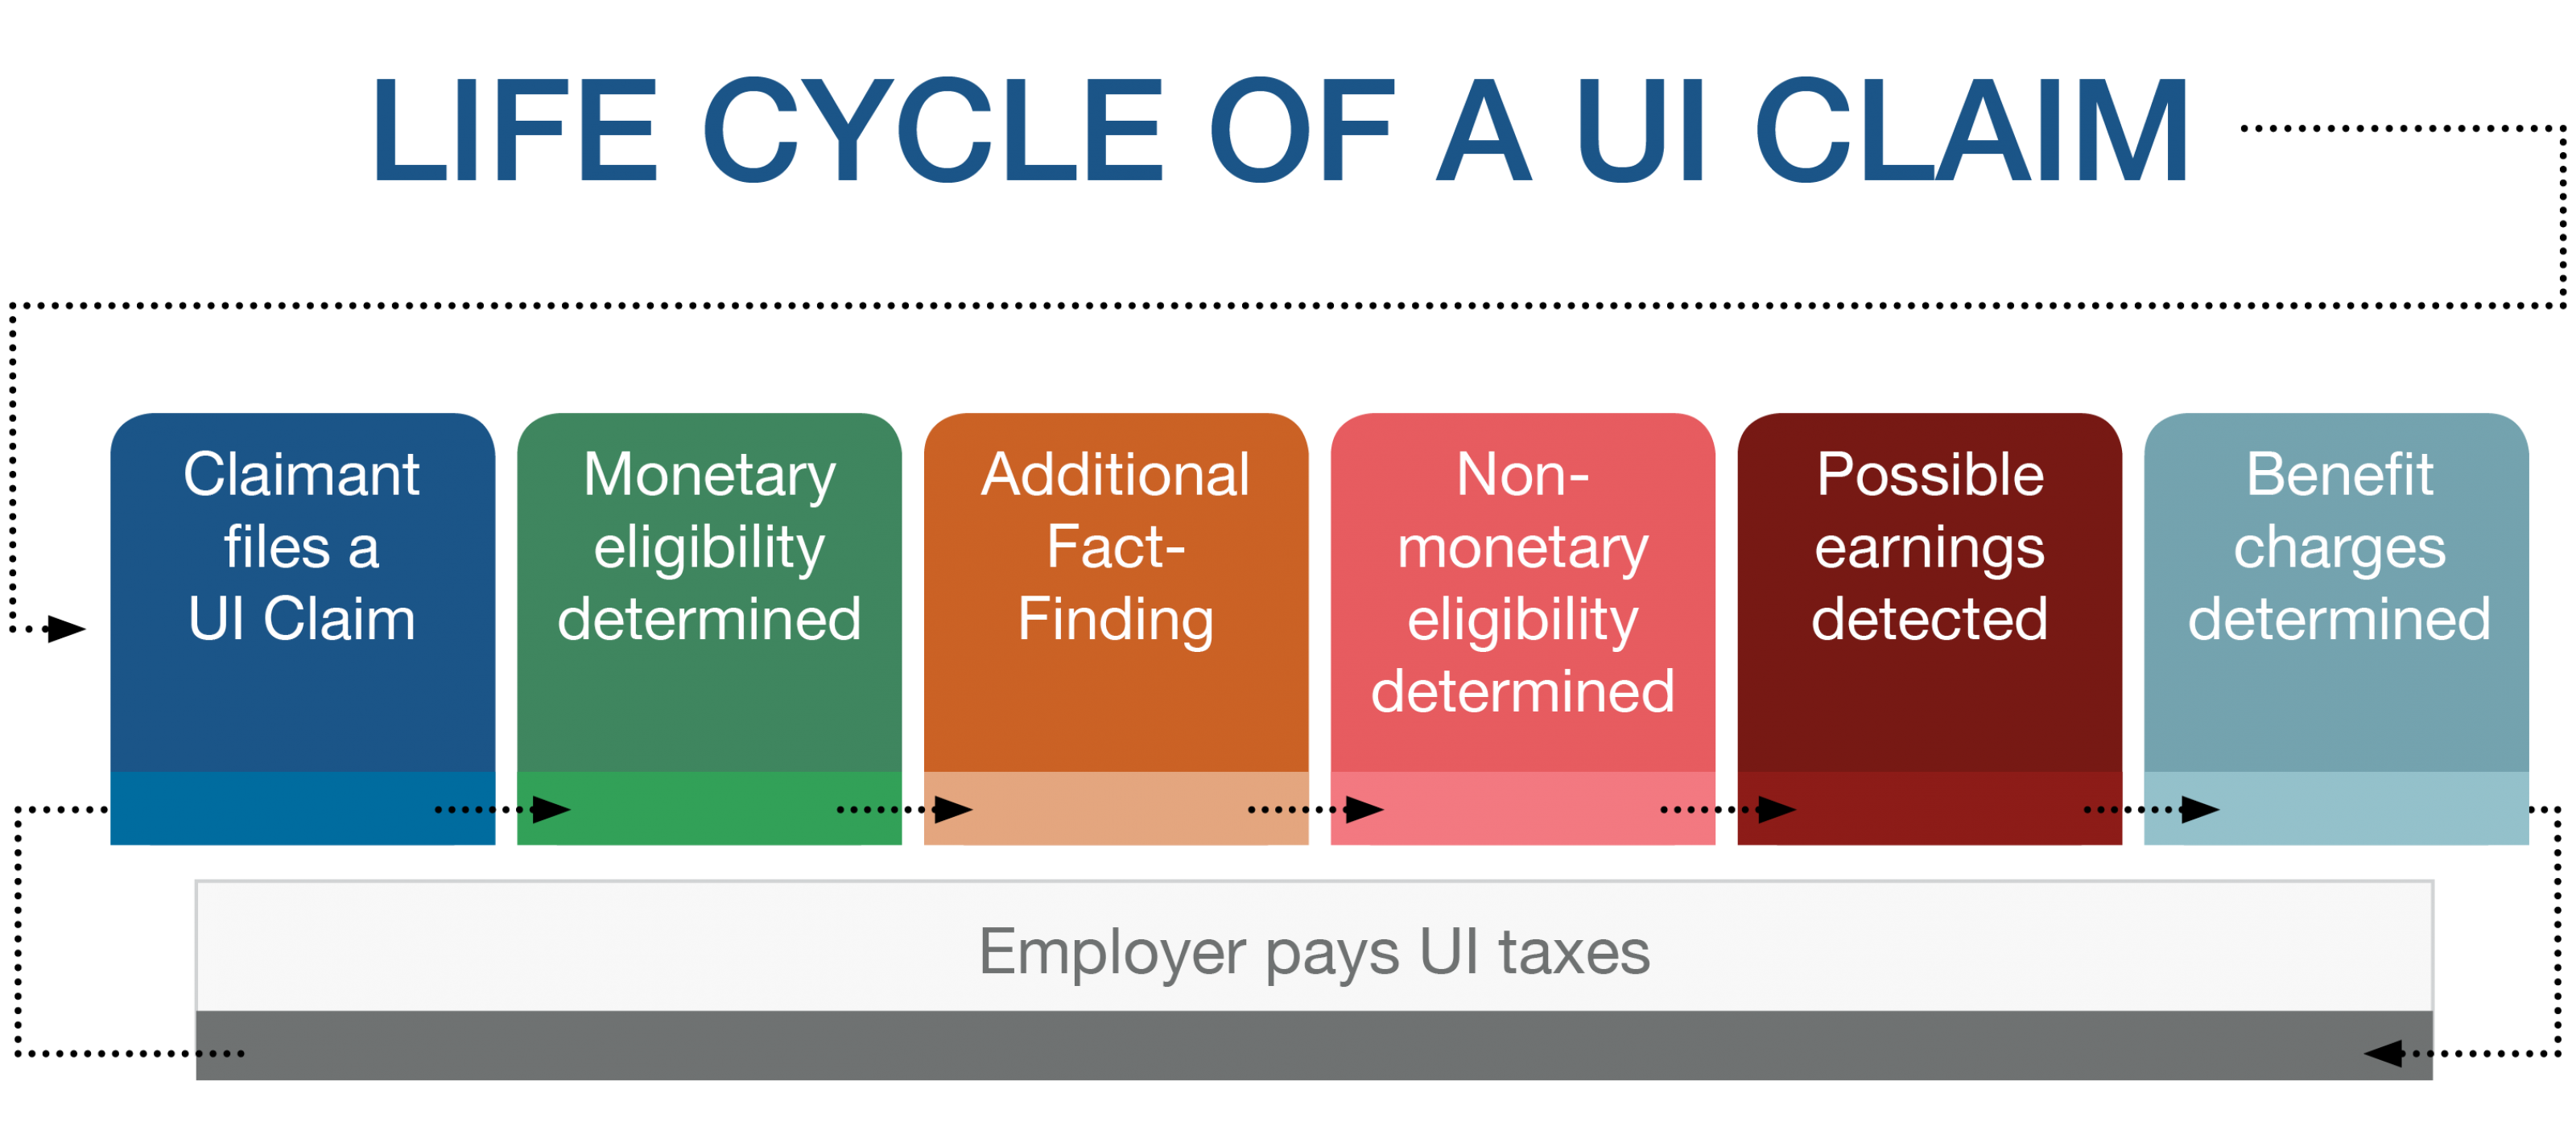 Life Cycle of a UI Claim: 1. Claimant files a UI Claim 2. Monetary eligibility determined 3. Additional Fact-Finding 4. Non-monetary eligibility determined 5. Possible earnings detected 6. Benefit charged determined 7. Employer pays UI taxes